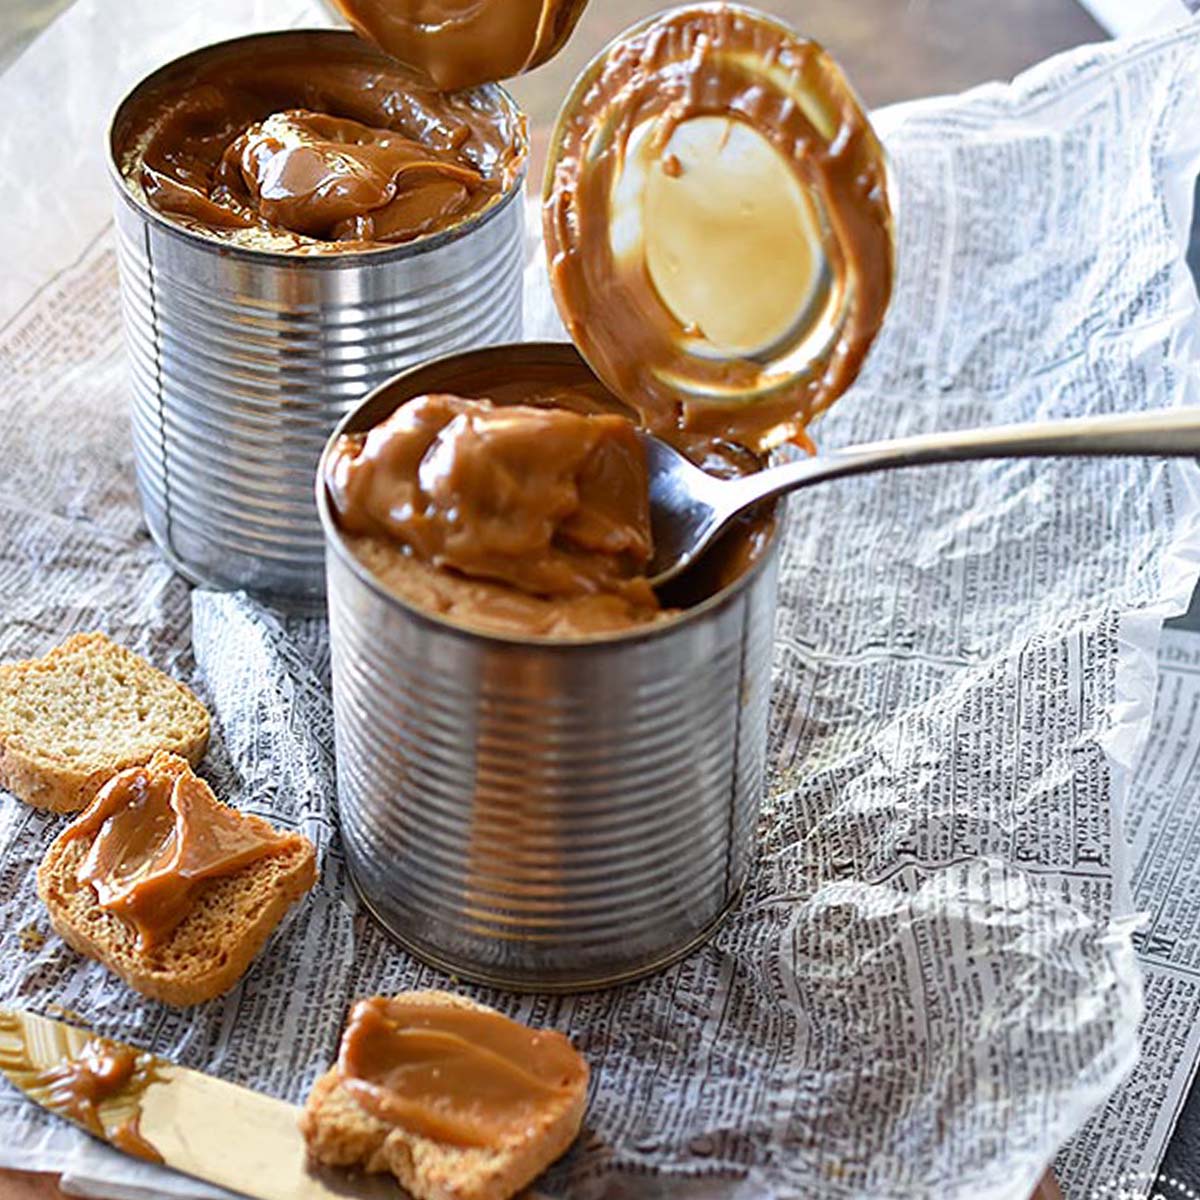 If stored in an airtight container, Dulce de Leche will remain good for somewhere between 1 to 3 months if left unopened.